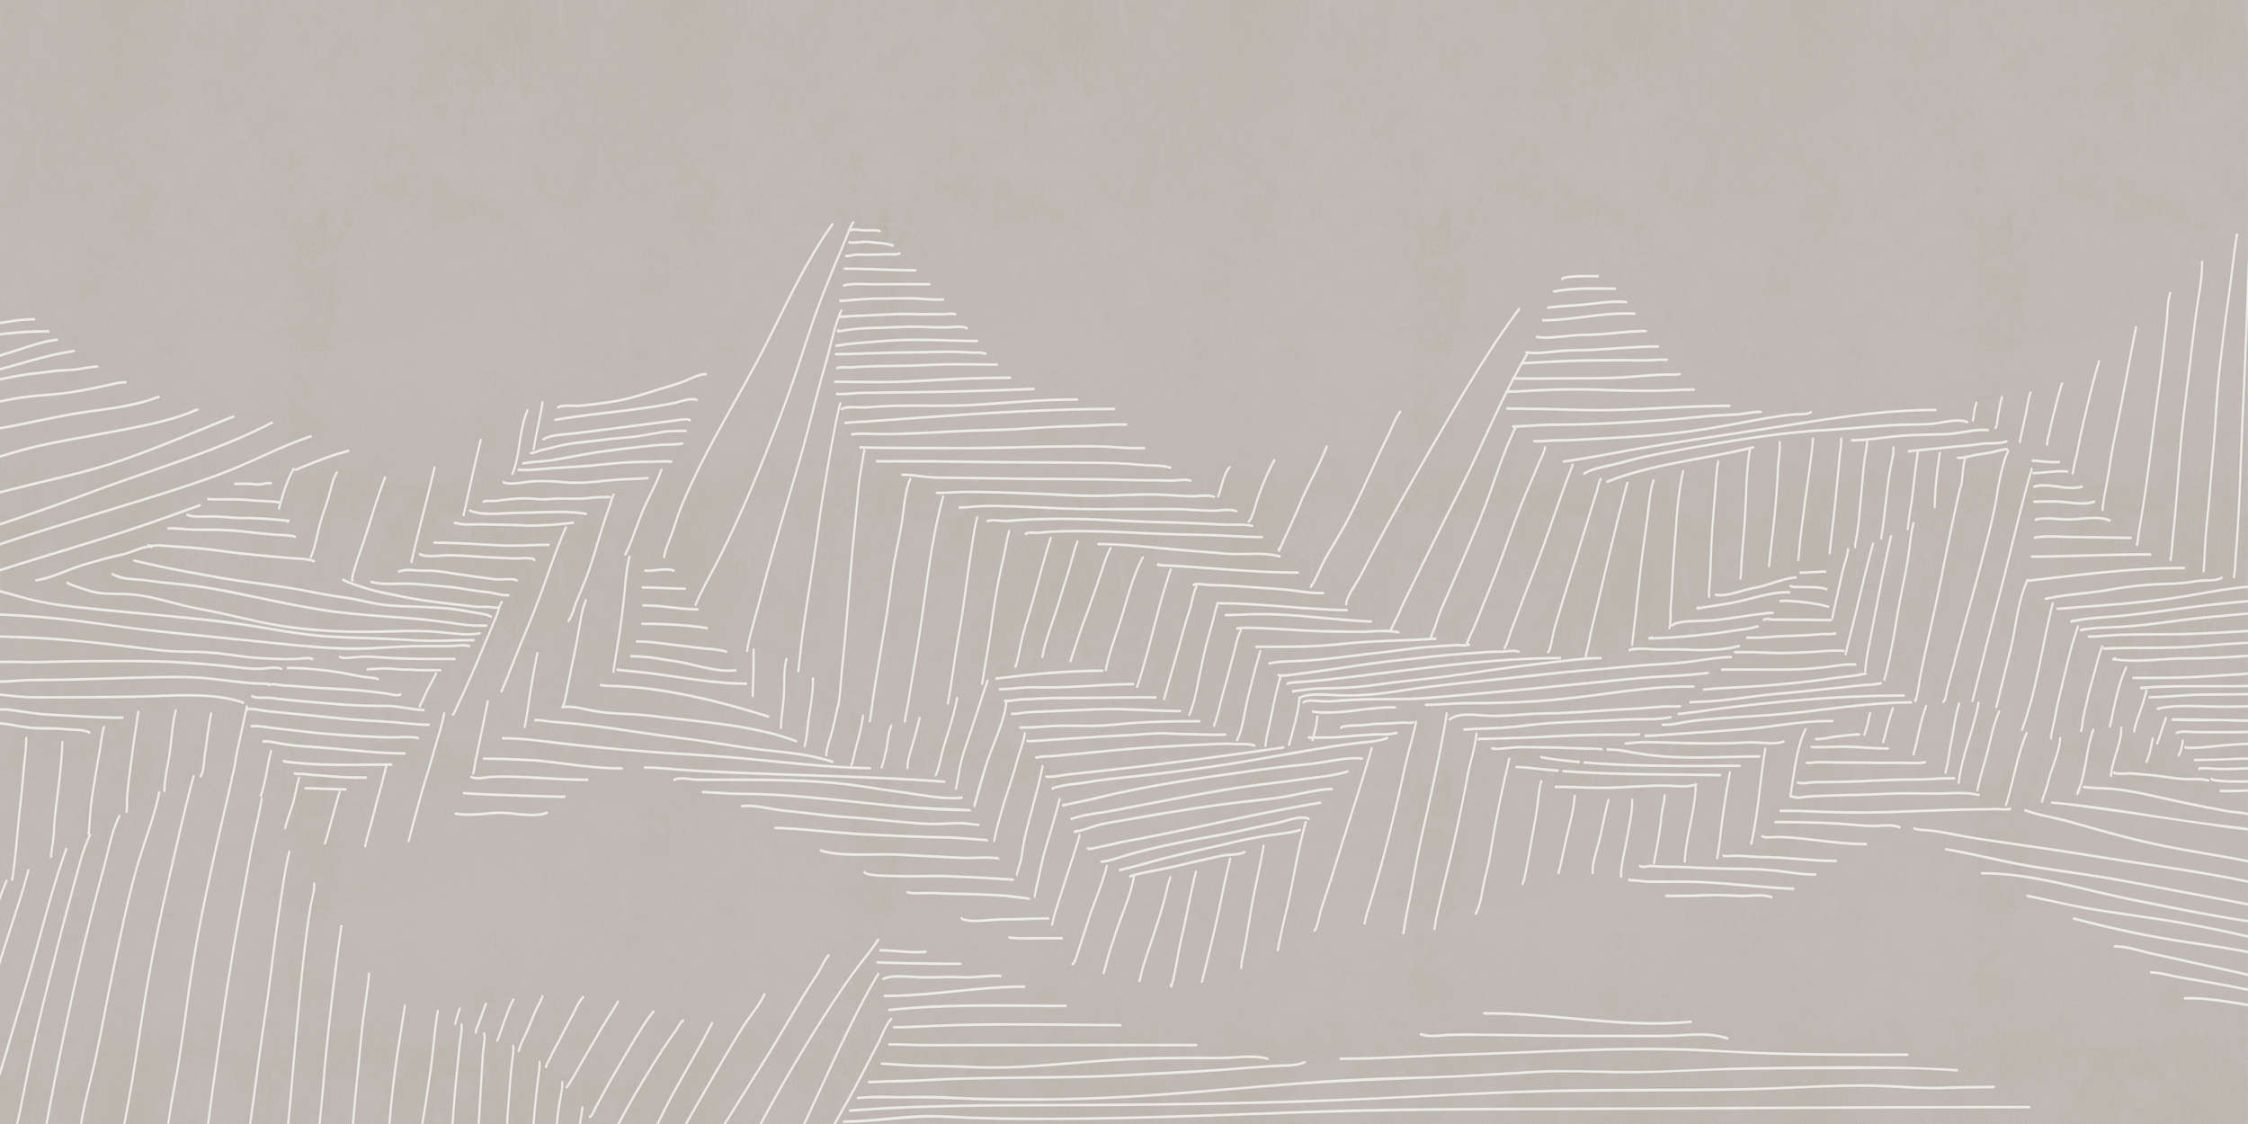             Photo wallpaper »victor« - Mountain landscape with line pattern - Grey | Light textured non-woven
        